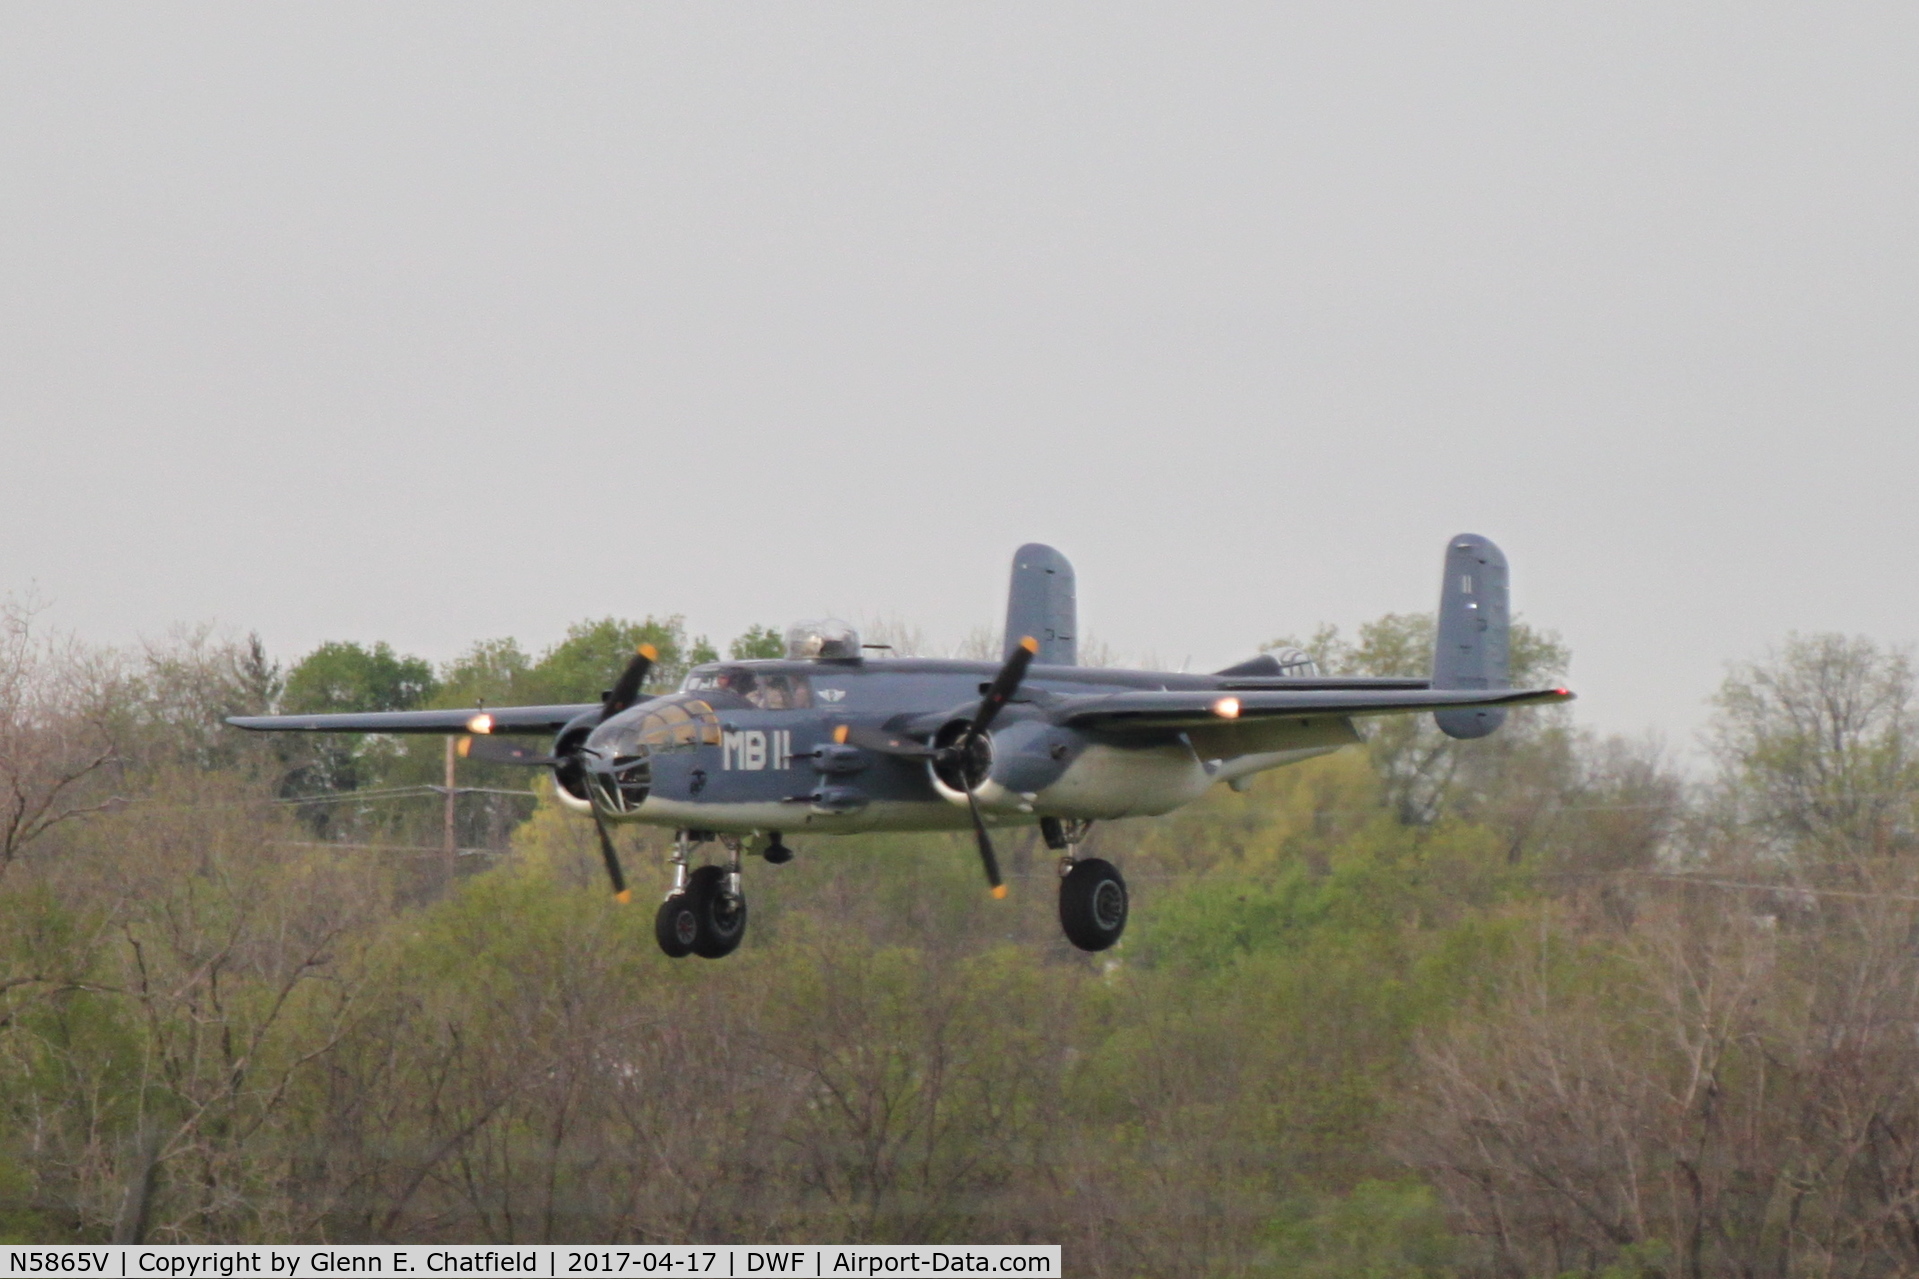 N5865V, 1945 North American B-25J Mitchell Mitchell C/N 108-34263, Arriving for the 75th Anniversary of the Doolittle Raid.